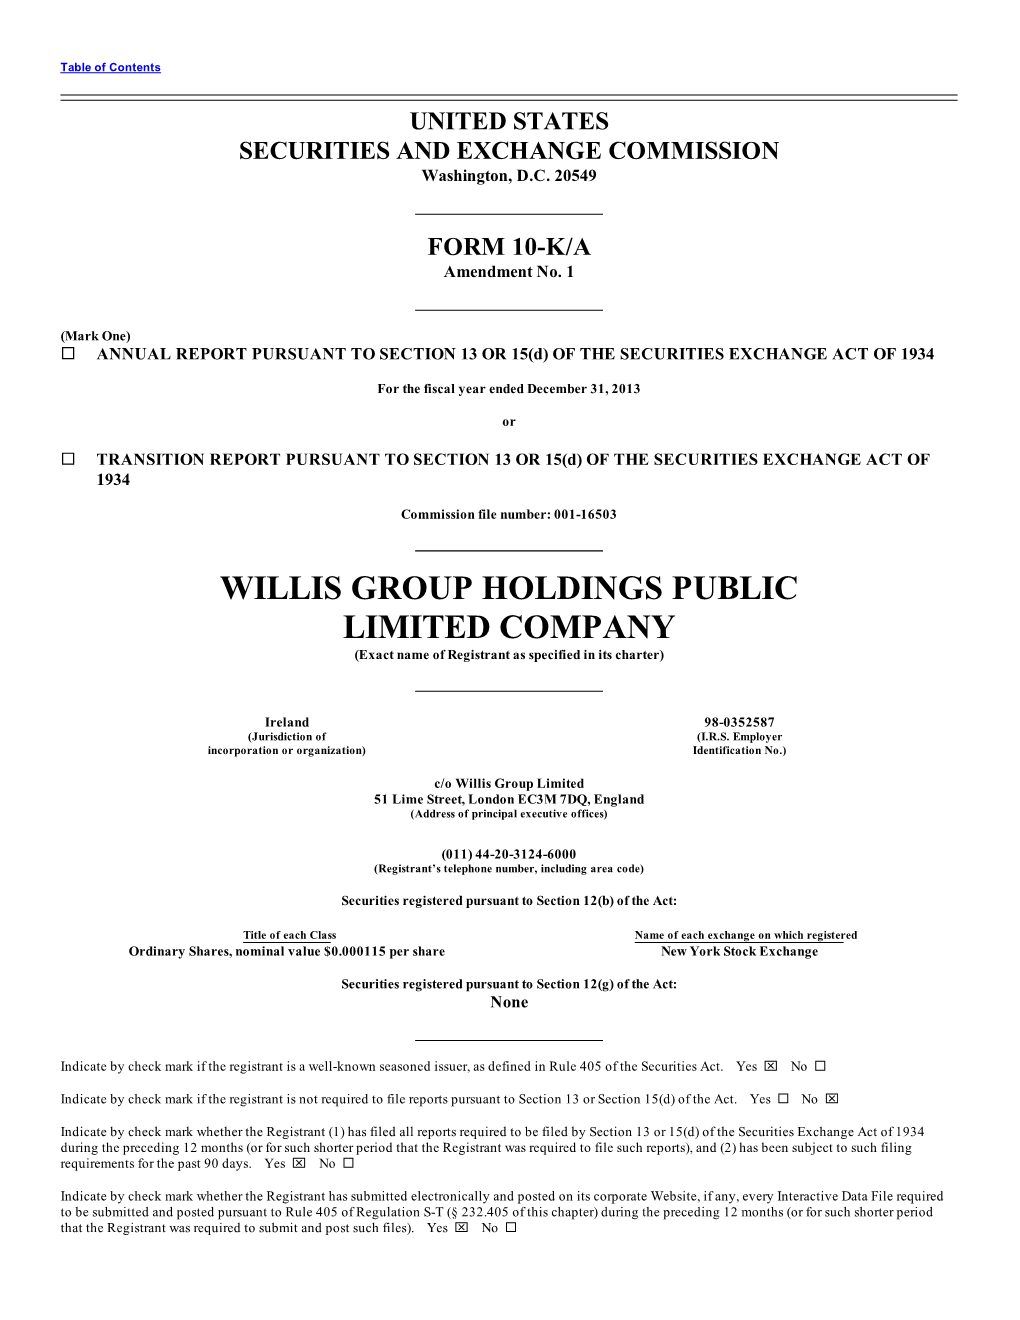 WILLIS GROUP HOLDINGS PUBLIC LIMITED COMPANY (Exact Name of Registrant As Specified in Its Charter)